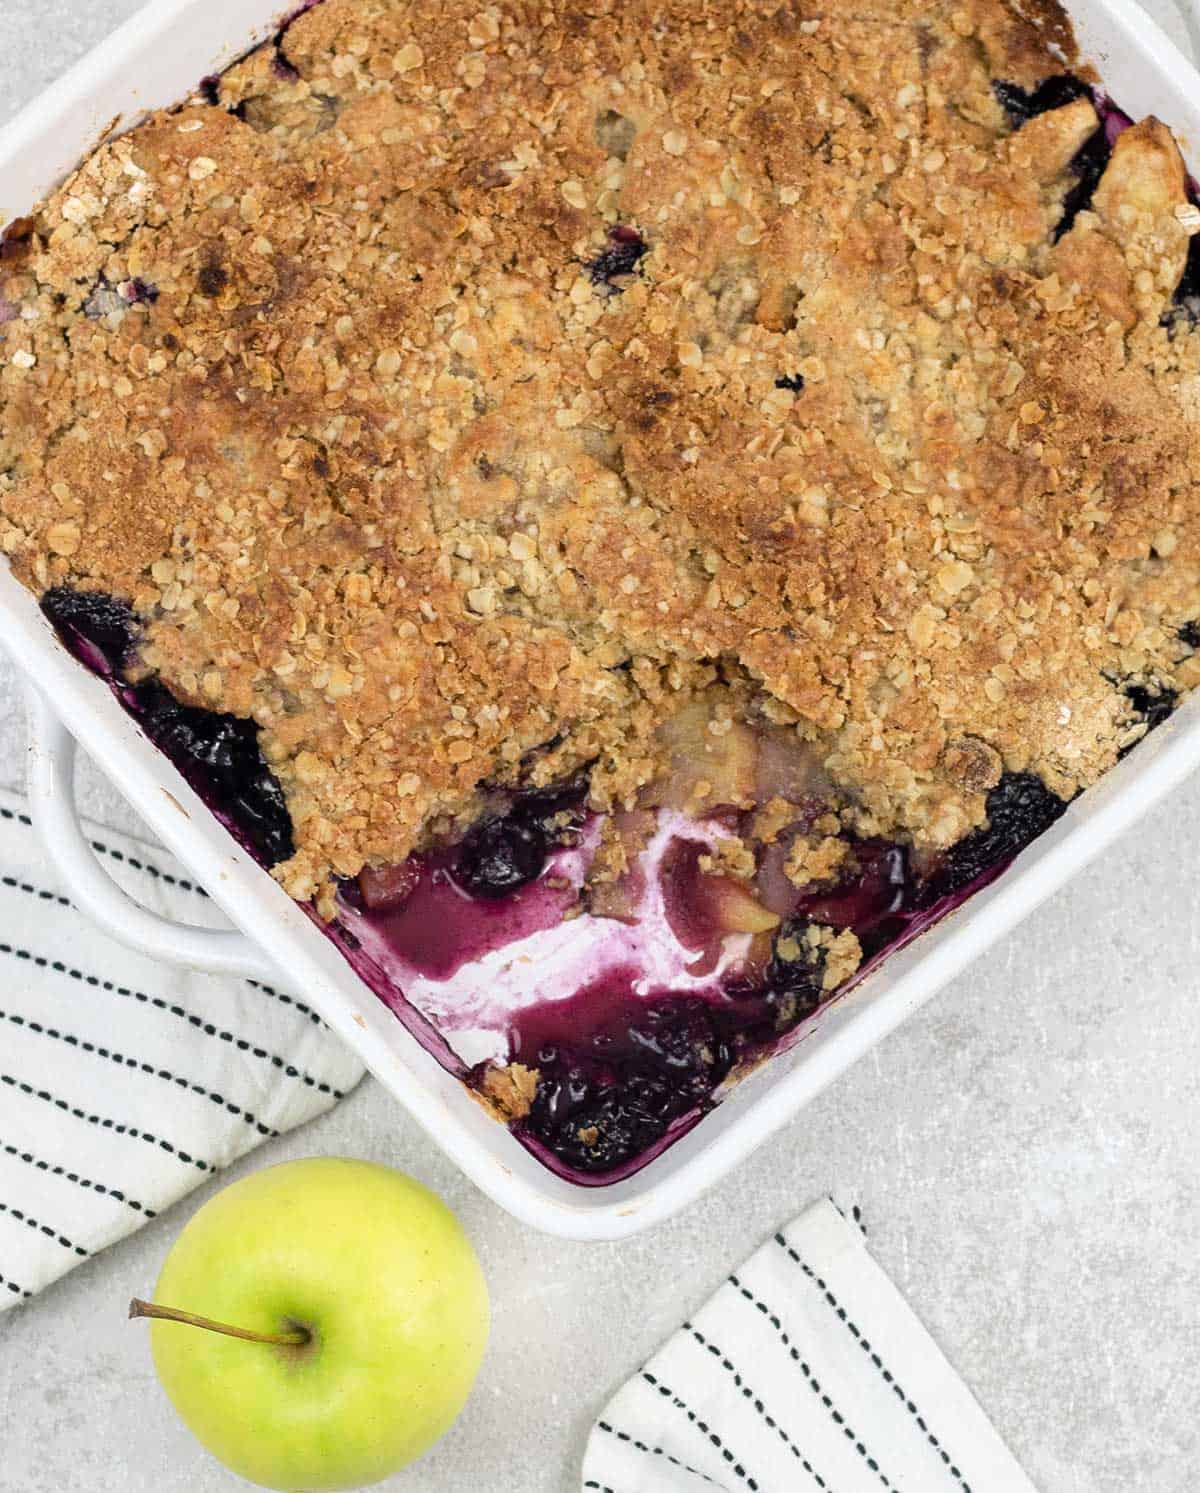 Apple and Blueberry Crumble in a baking pan.